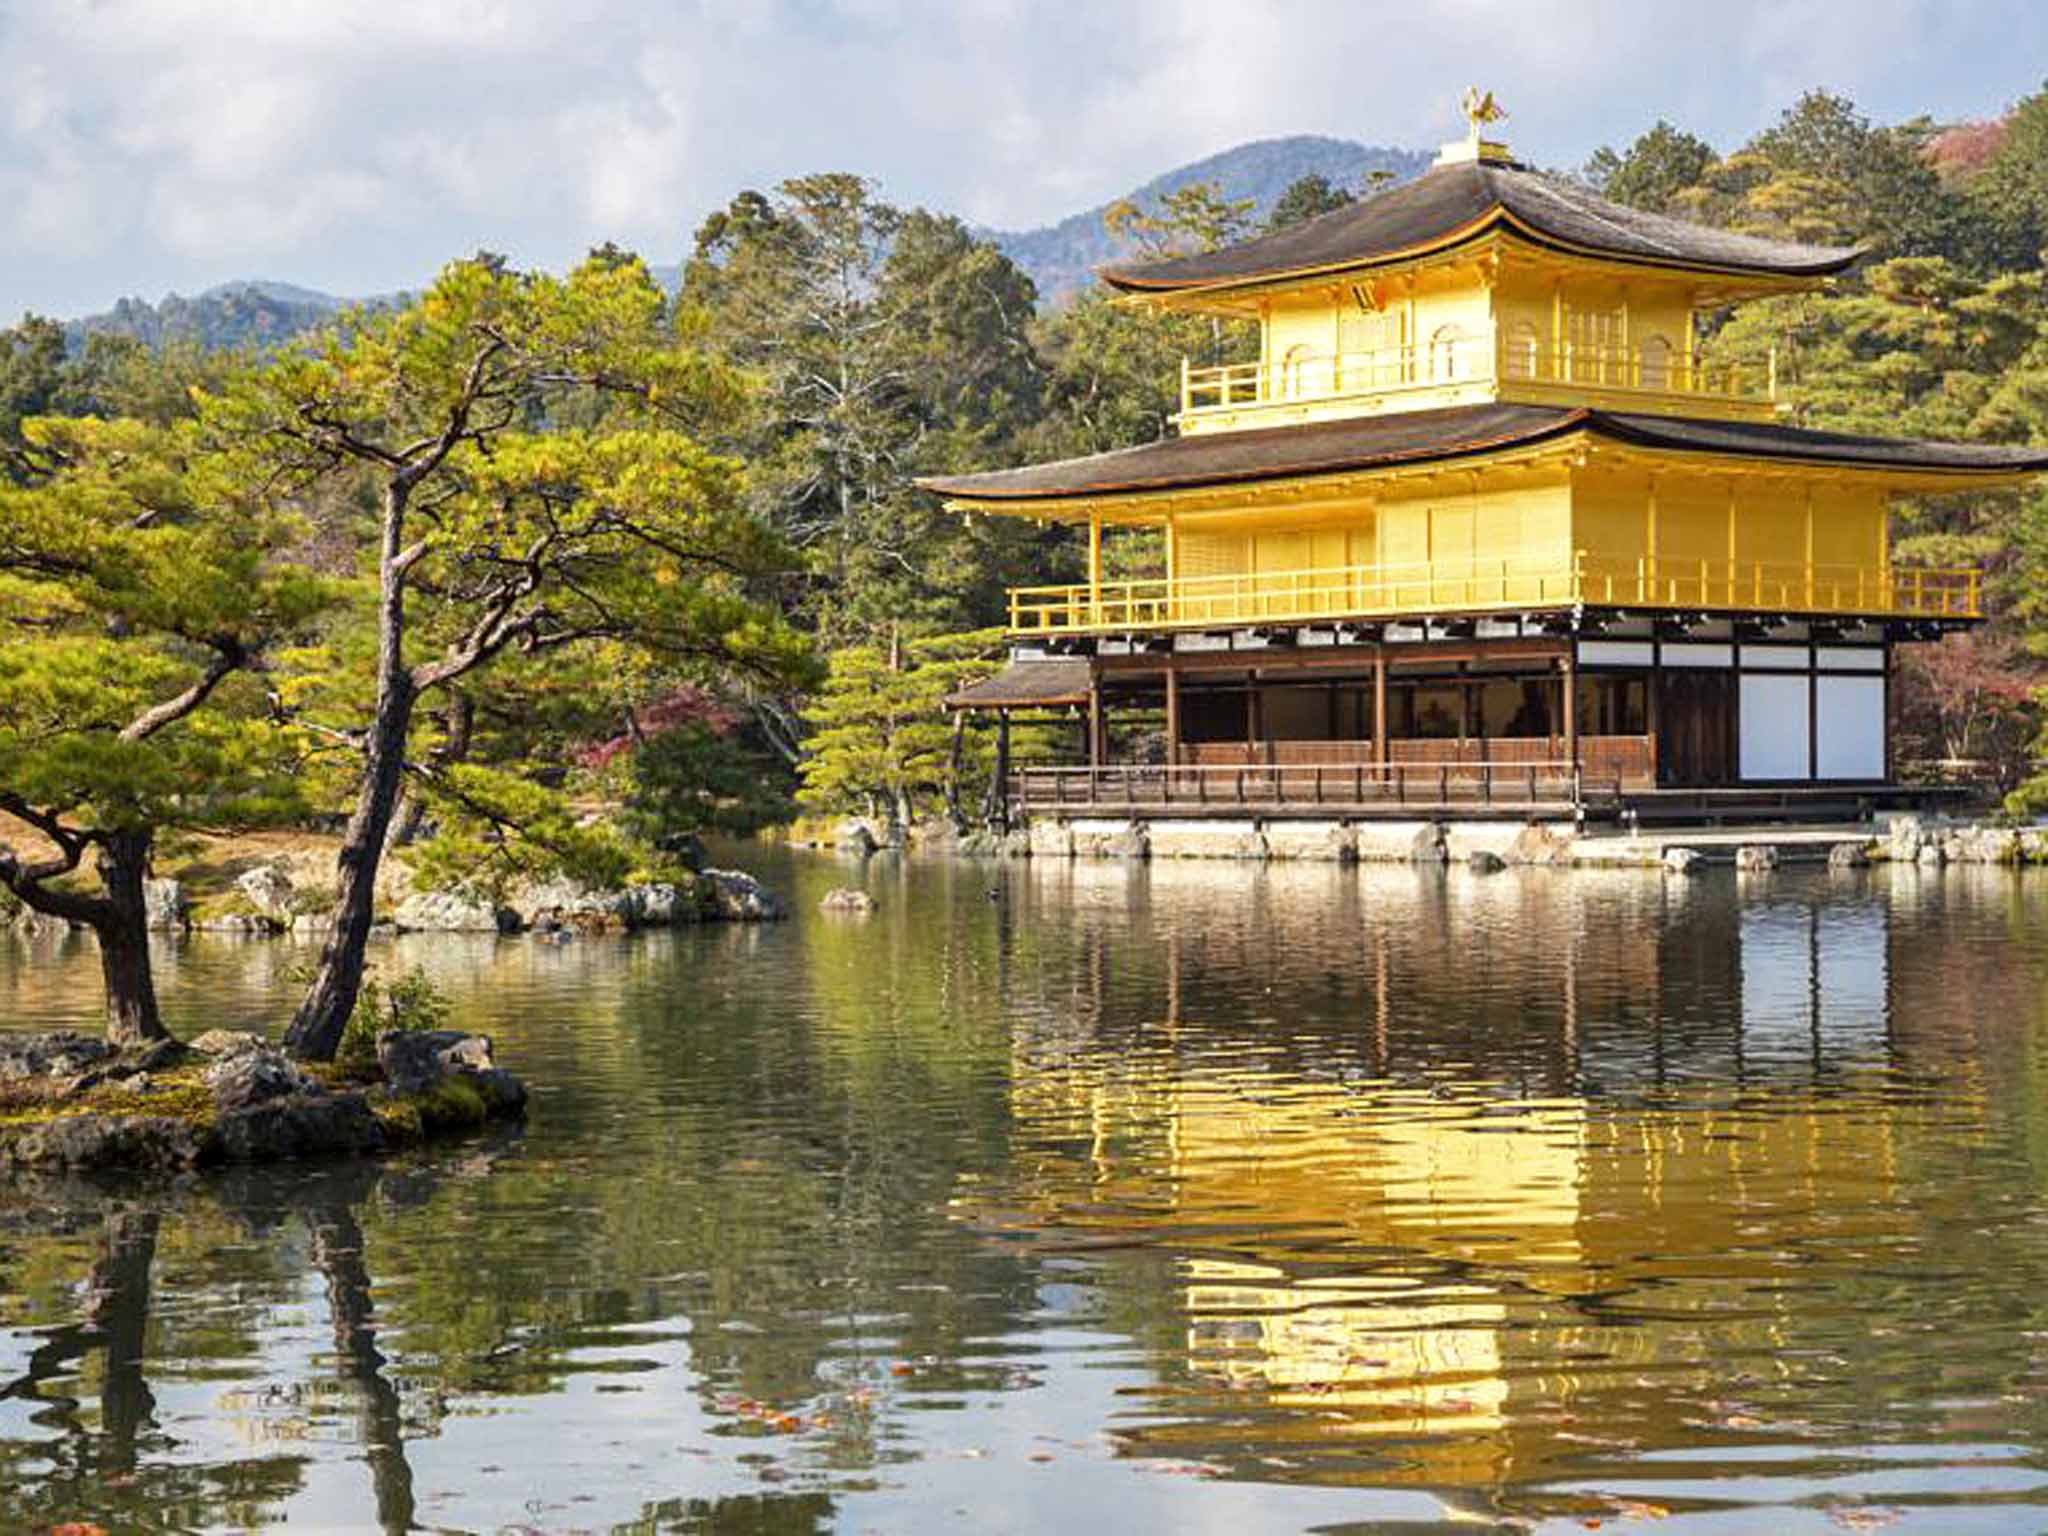 Set peace: the temples around Kyoto were unforgettable